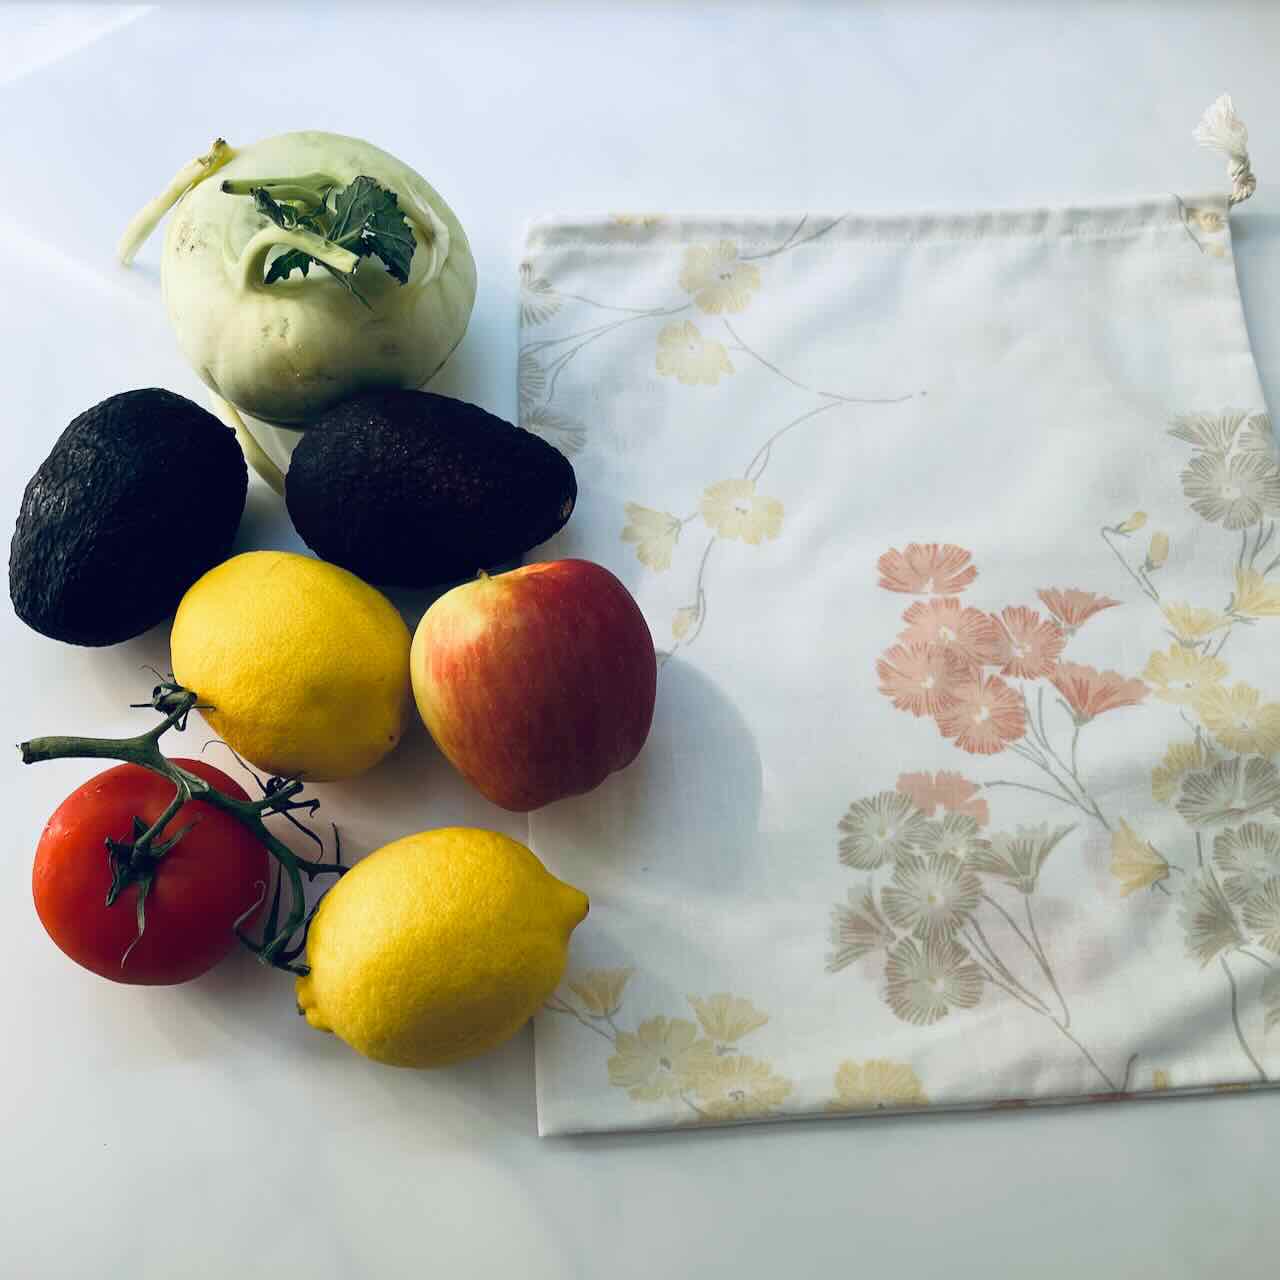 Upcycled Fabric Reusable Produce Bag - Wildflower